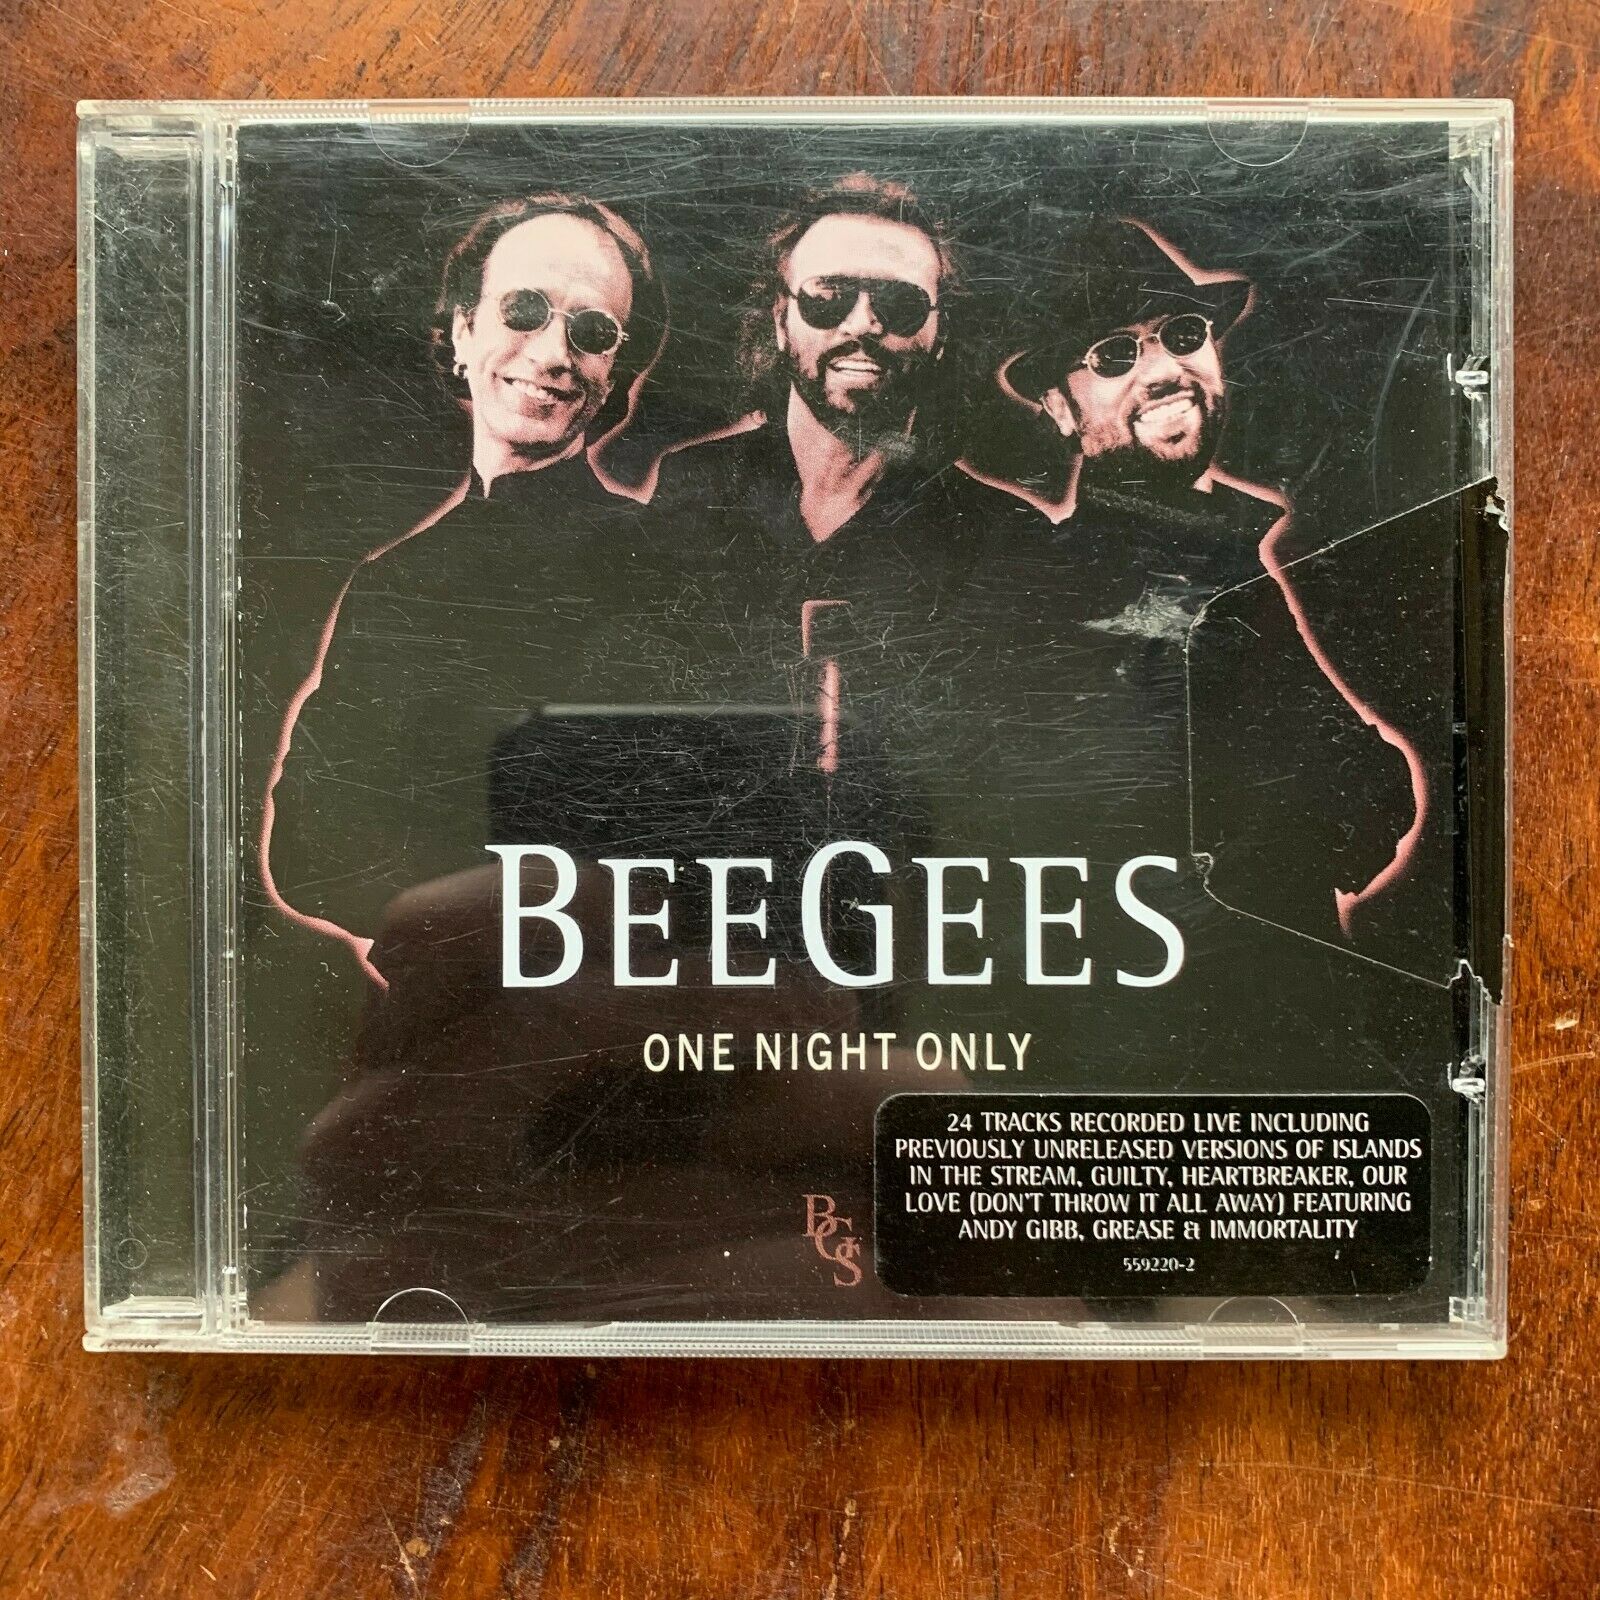 Bee Gees One Night Only Cd 1998 Double Live Album Rock Pop